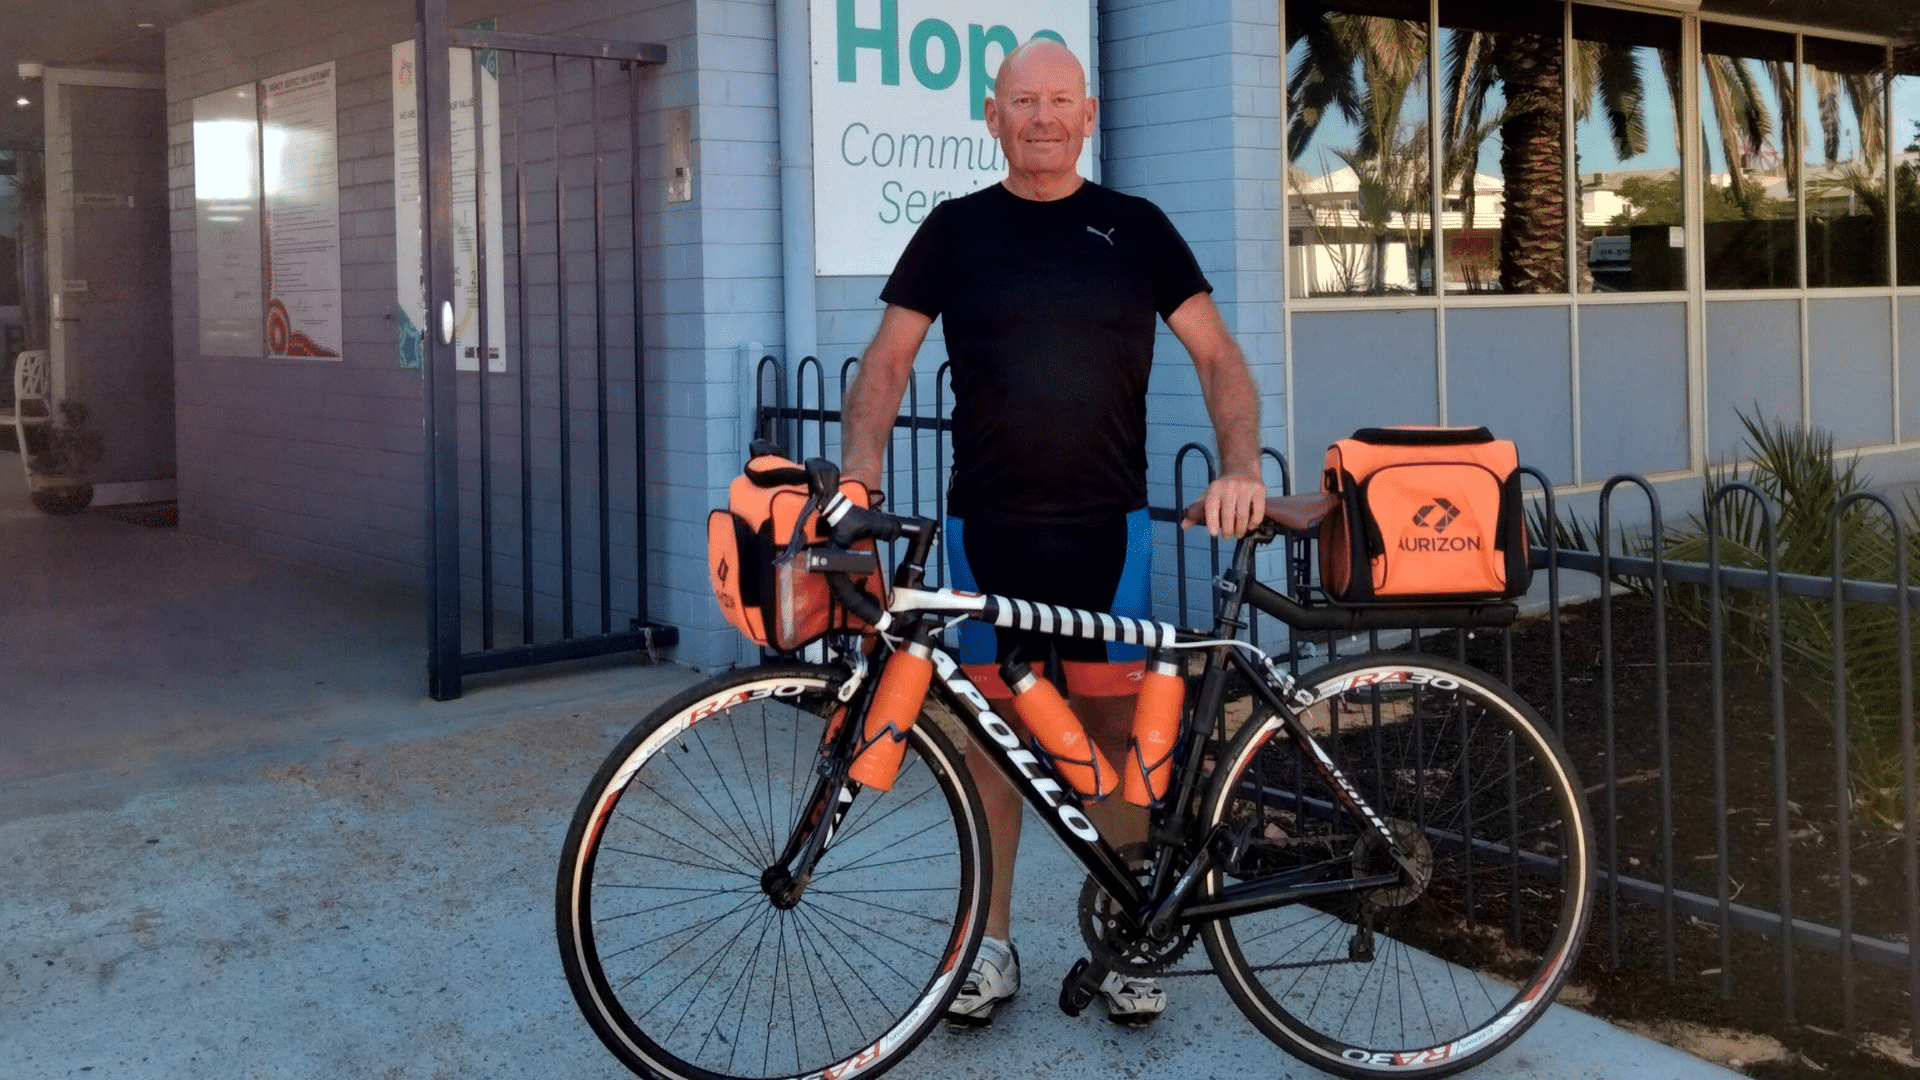 Paul Richardson, a man wearing black cycling gear, stands with his bike.